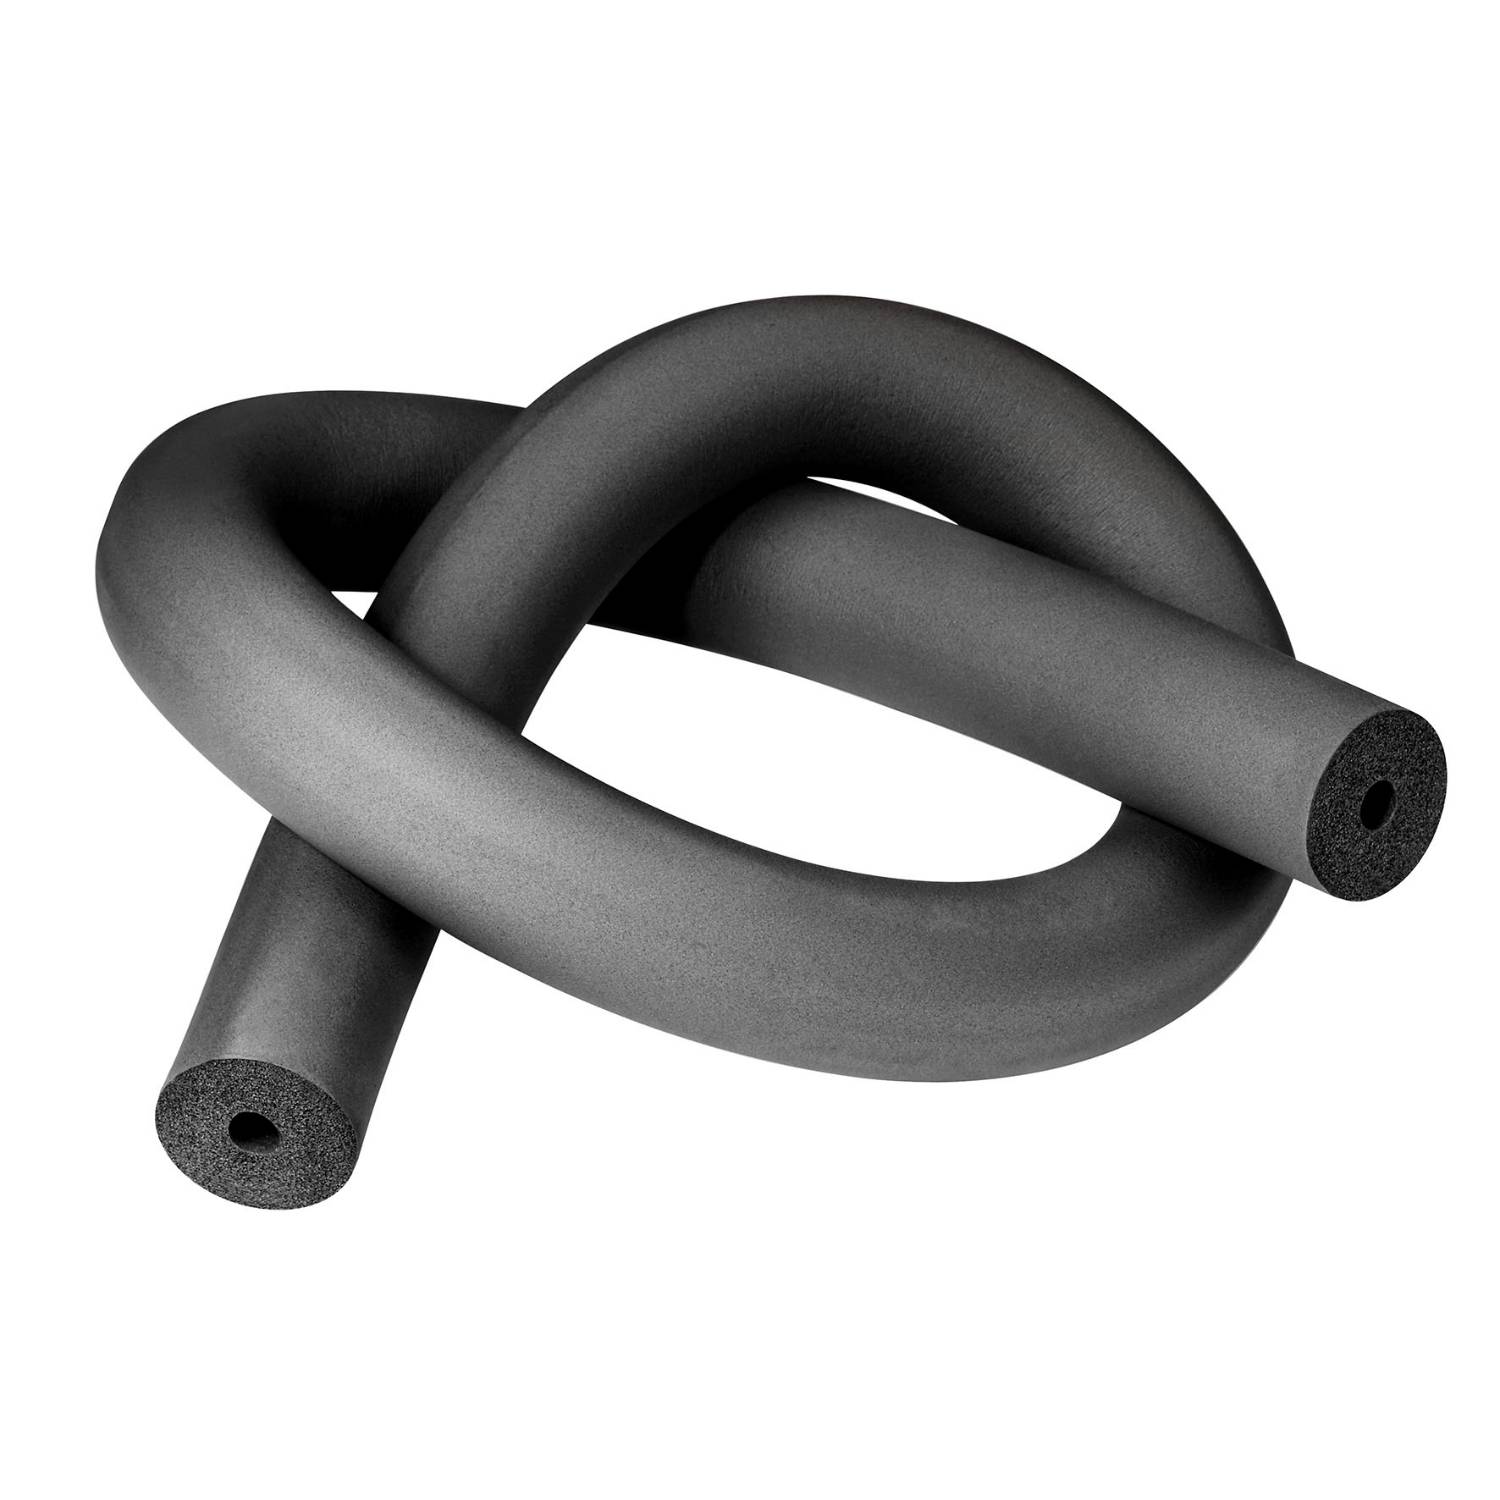 Kaiflex ST Tubes - Rubber pipe insulation